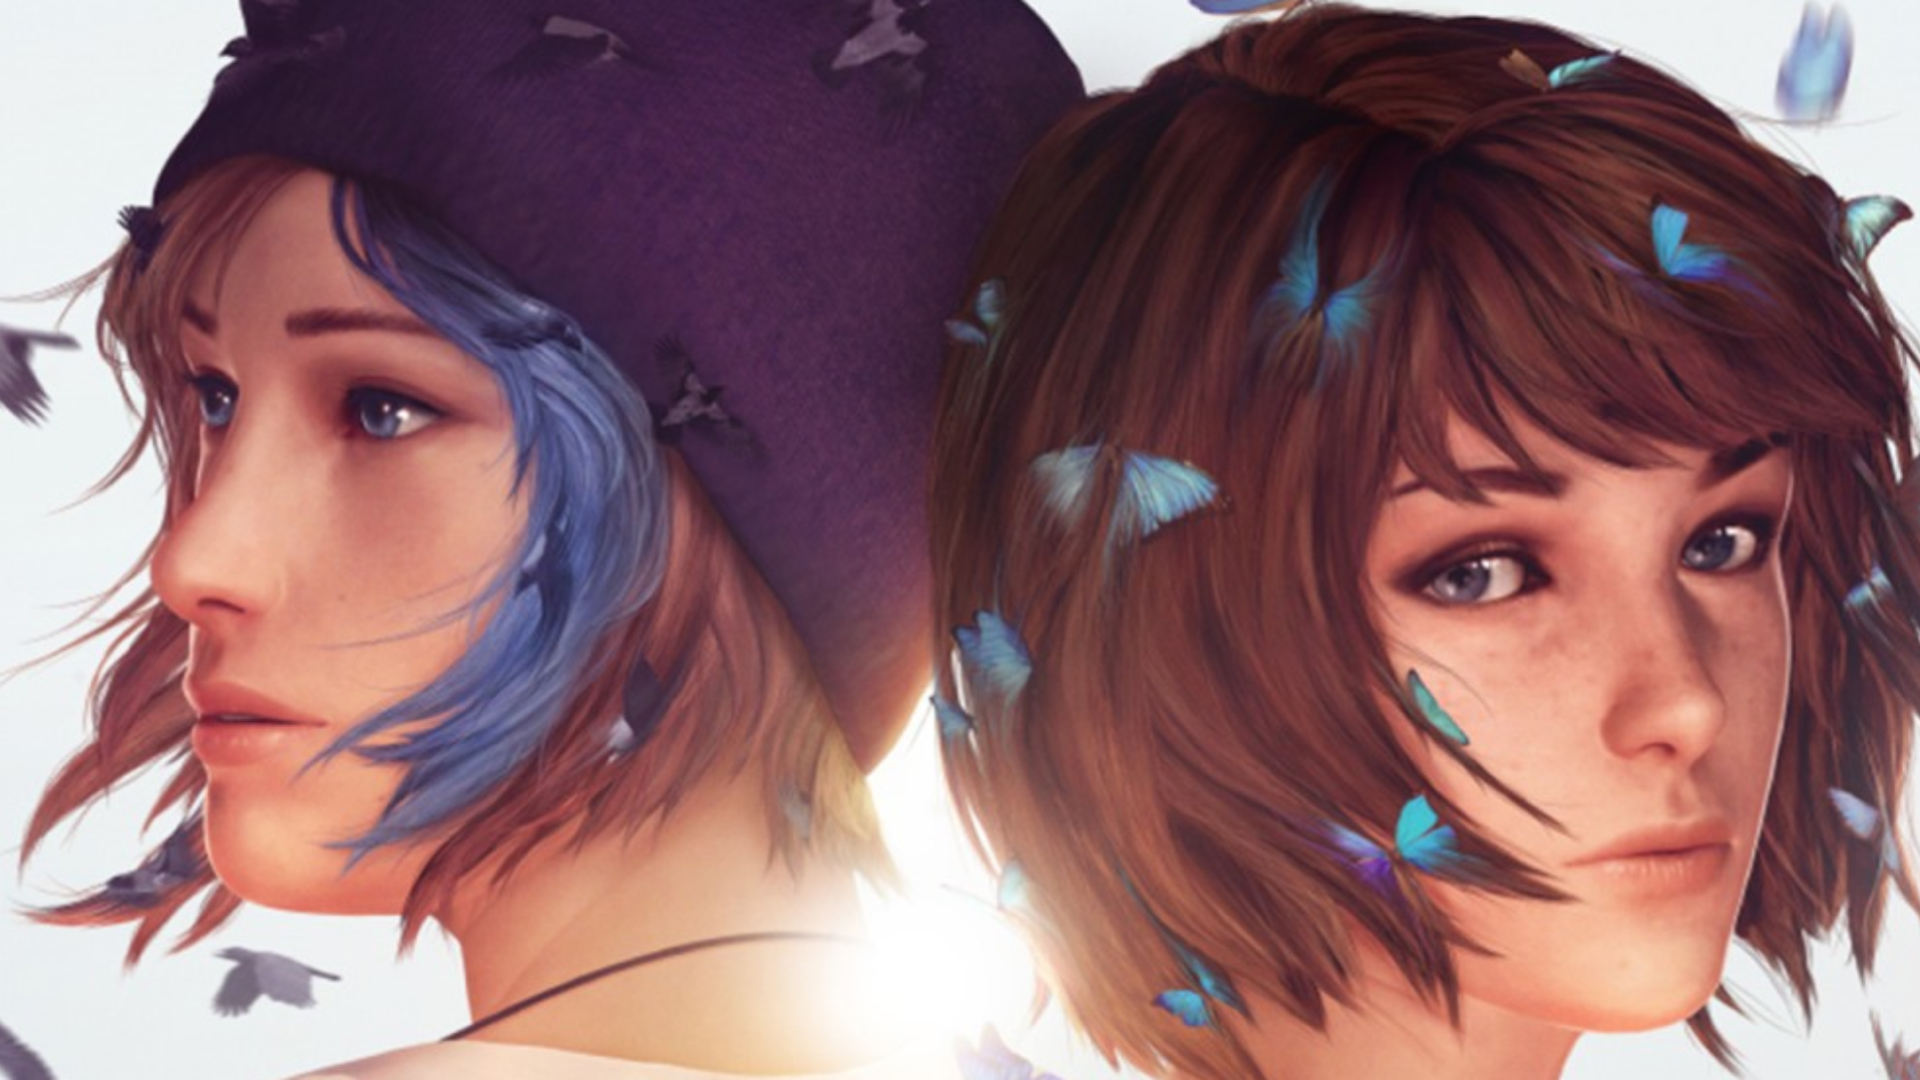 Square Enix only published Life is Strange after a failed pitch for another  game